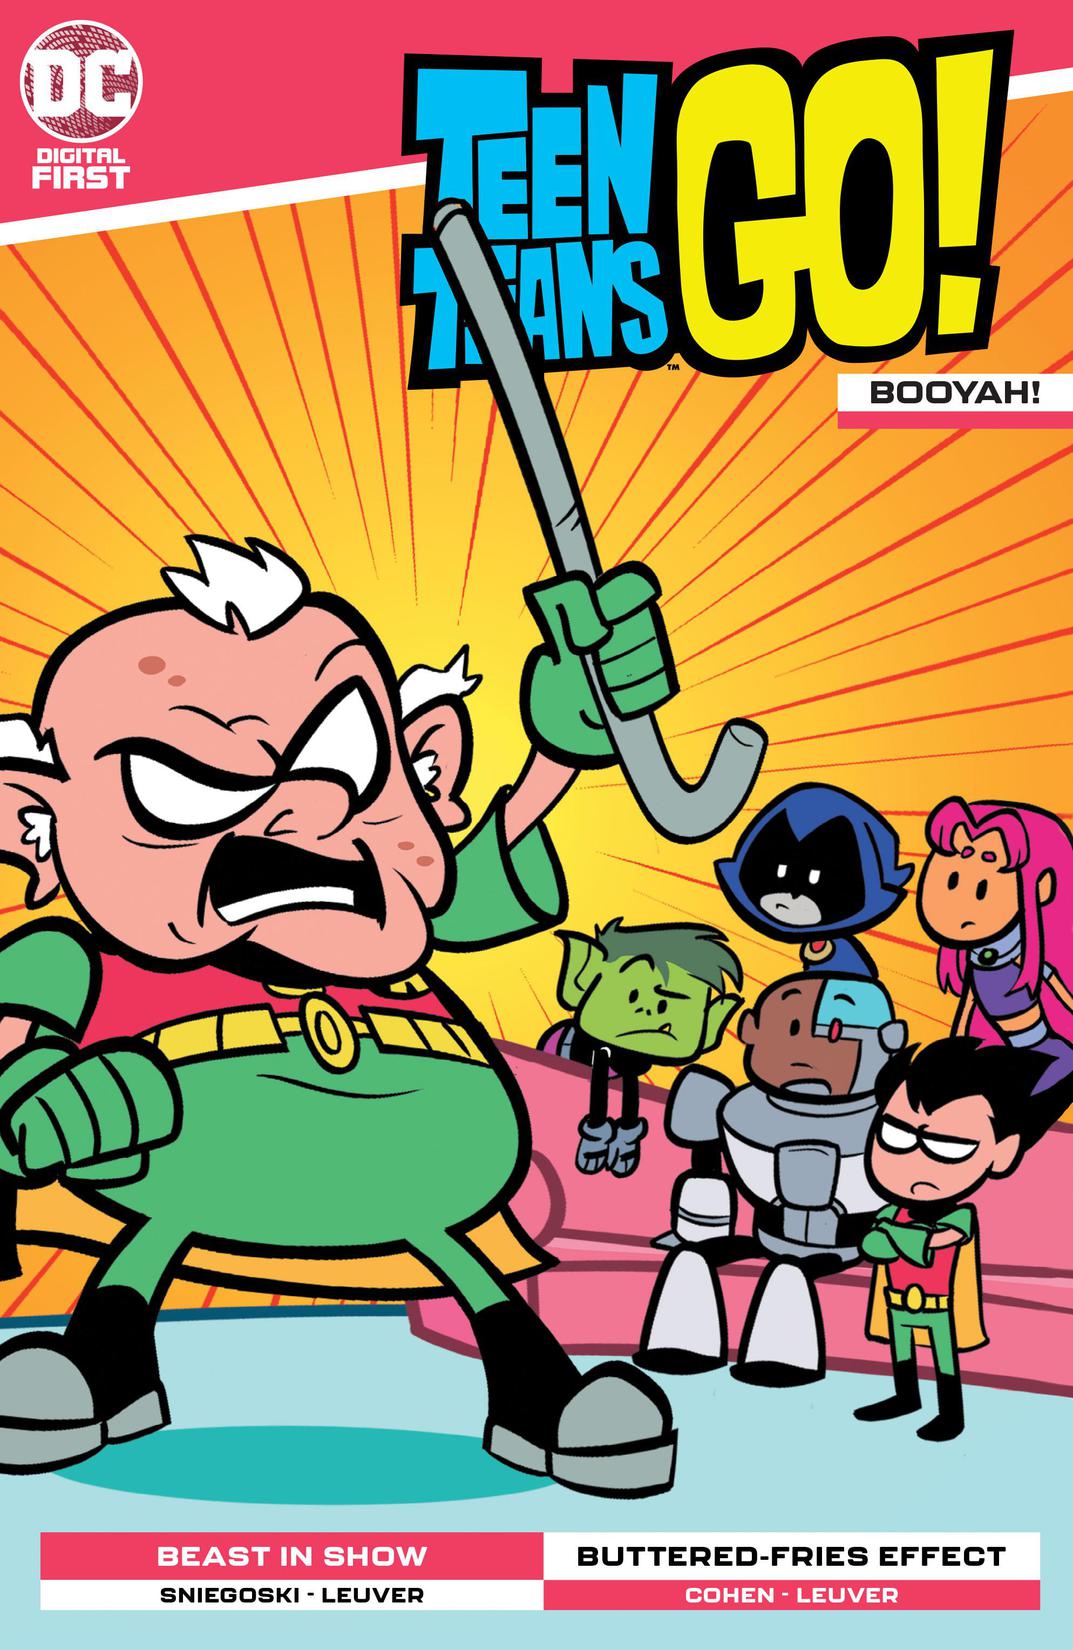 Teen Titans Go!: Booyah! #3 preview images